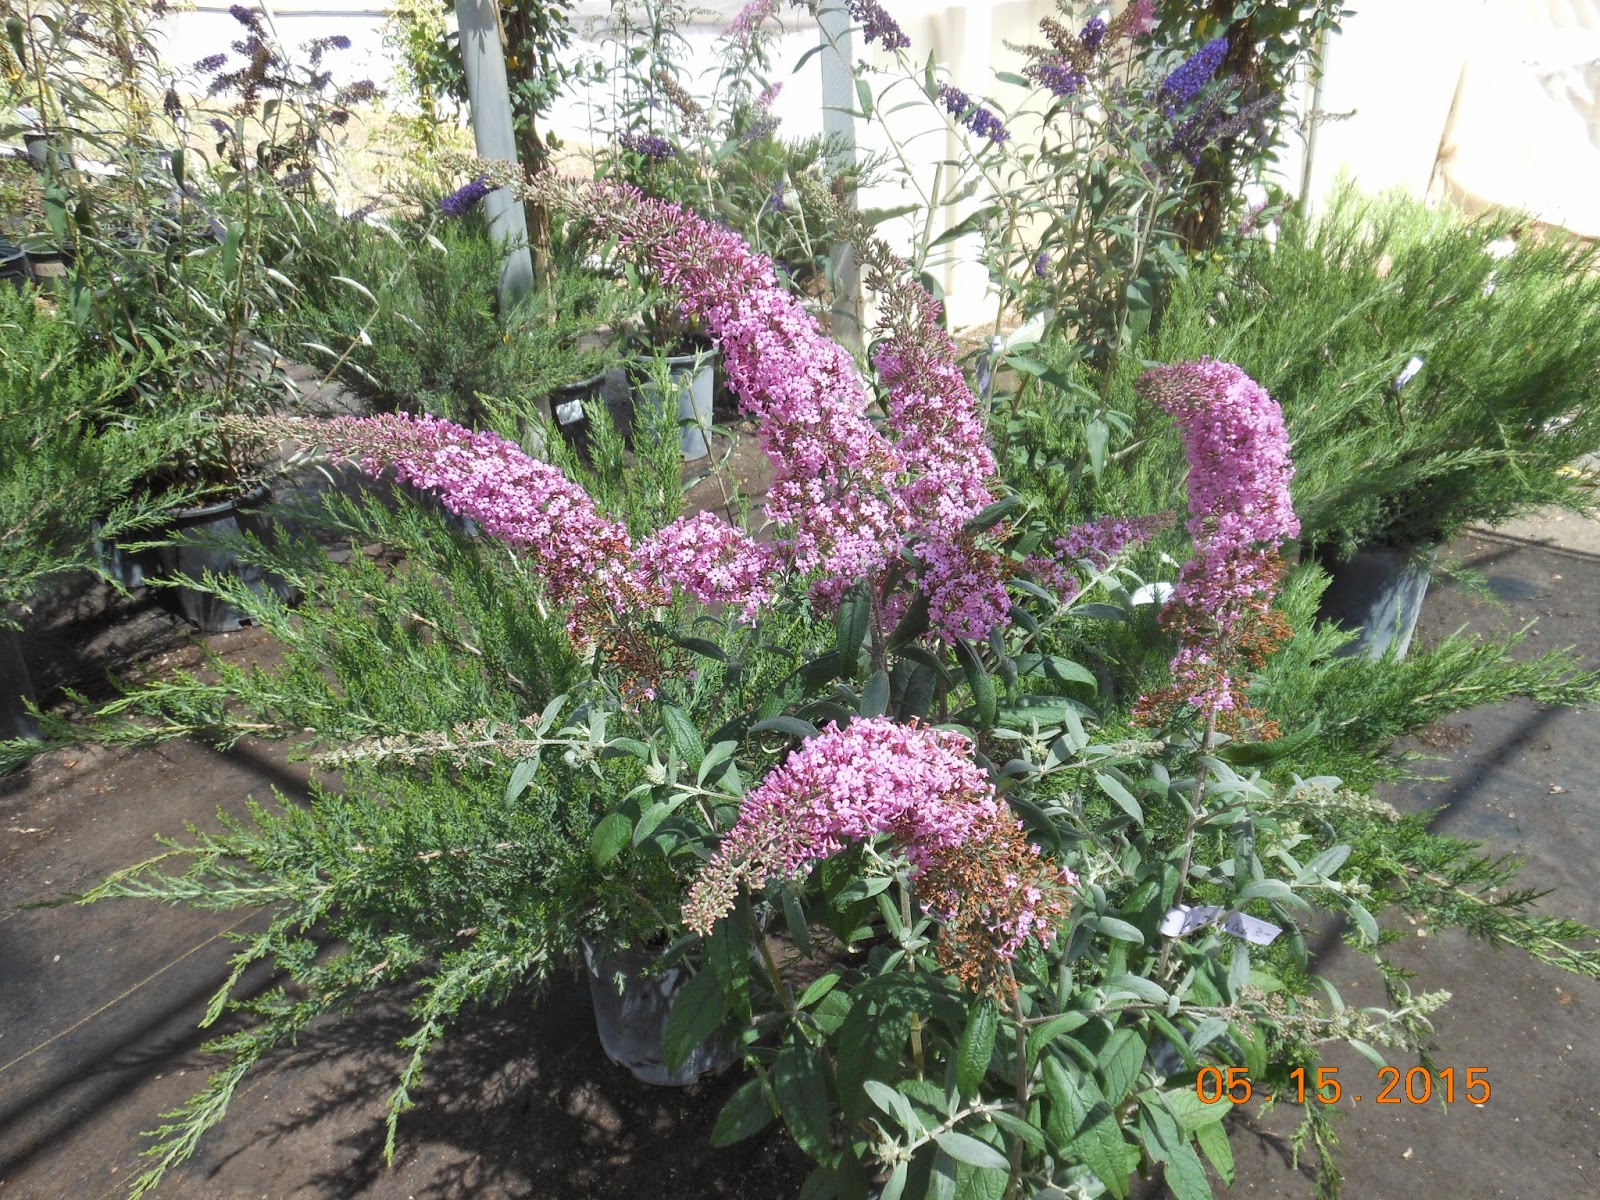 A Bad Witch S Blog Buddleia For Bees Butterflies And Breaking Free